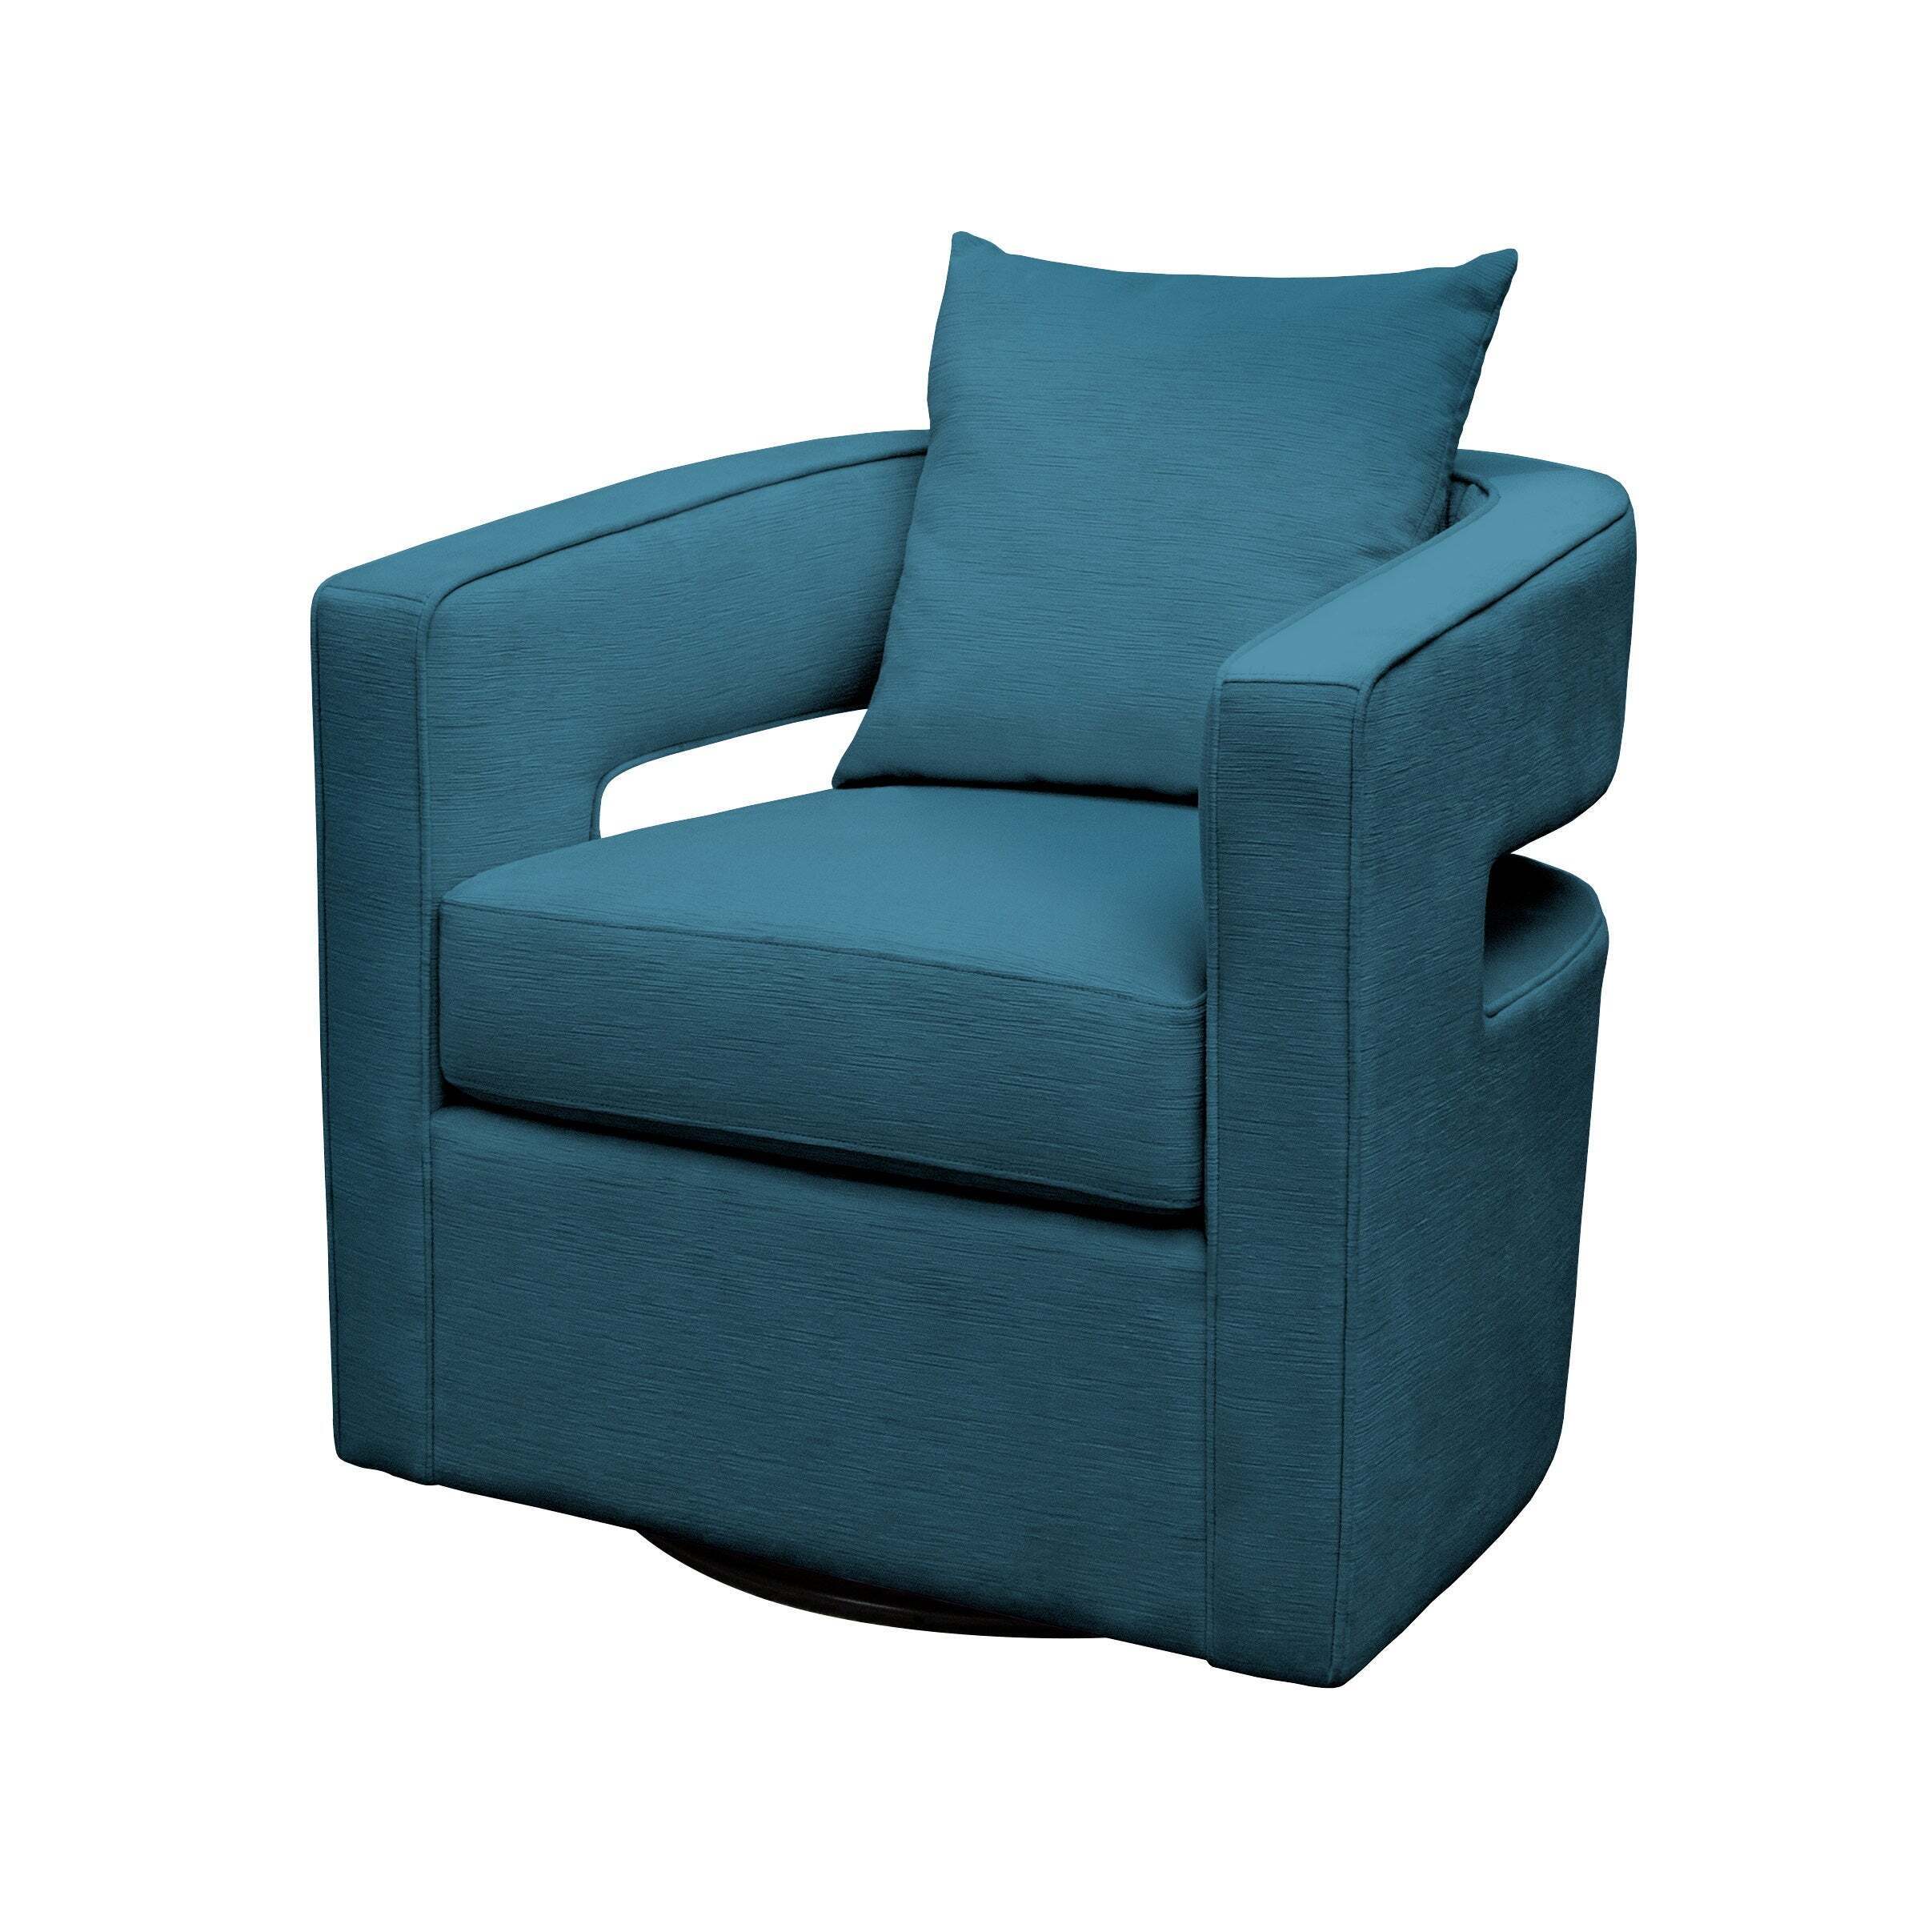 The wide swivel barrel chair with negative space